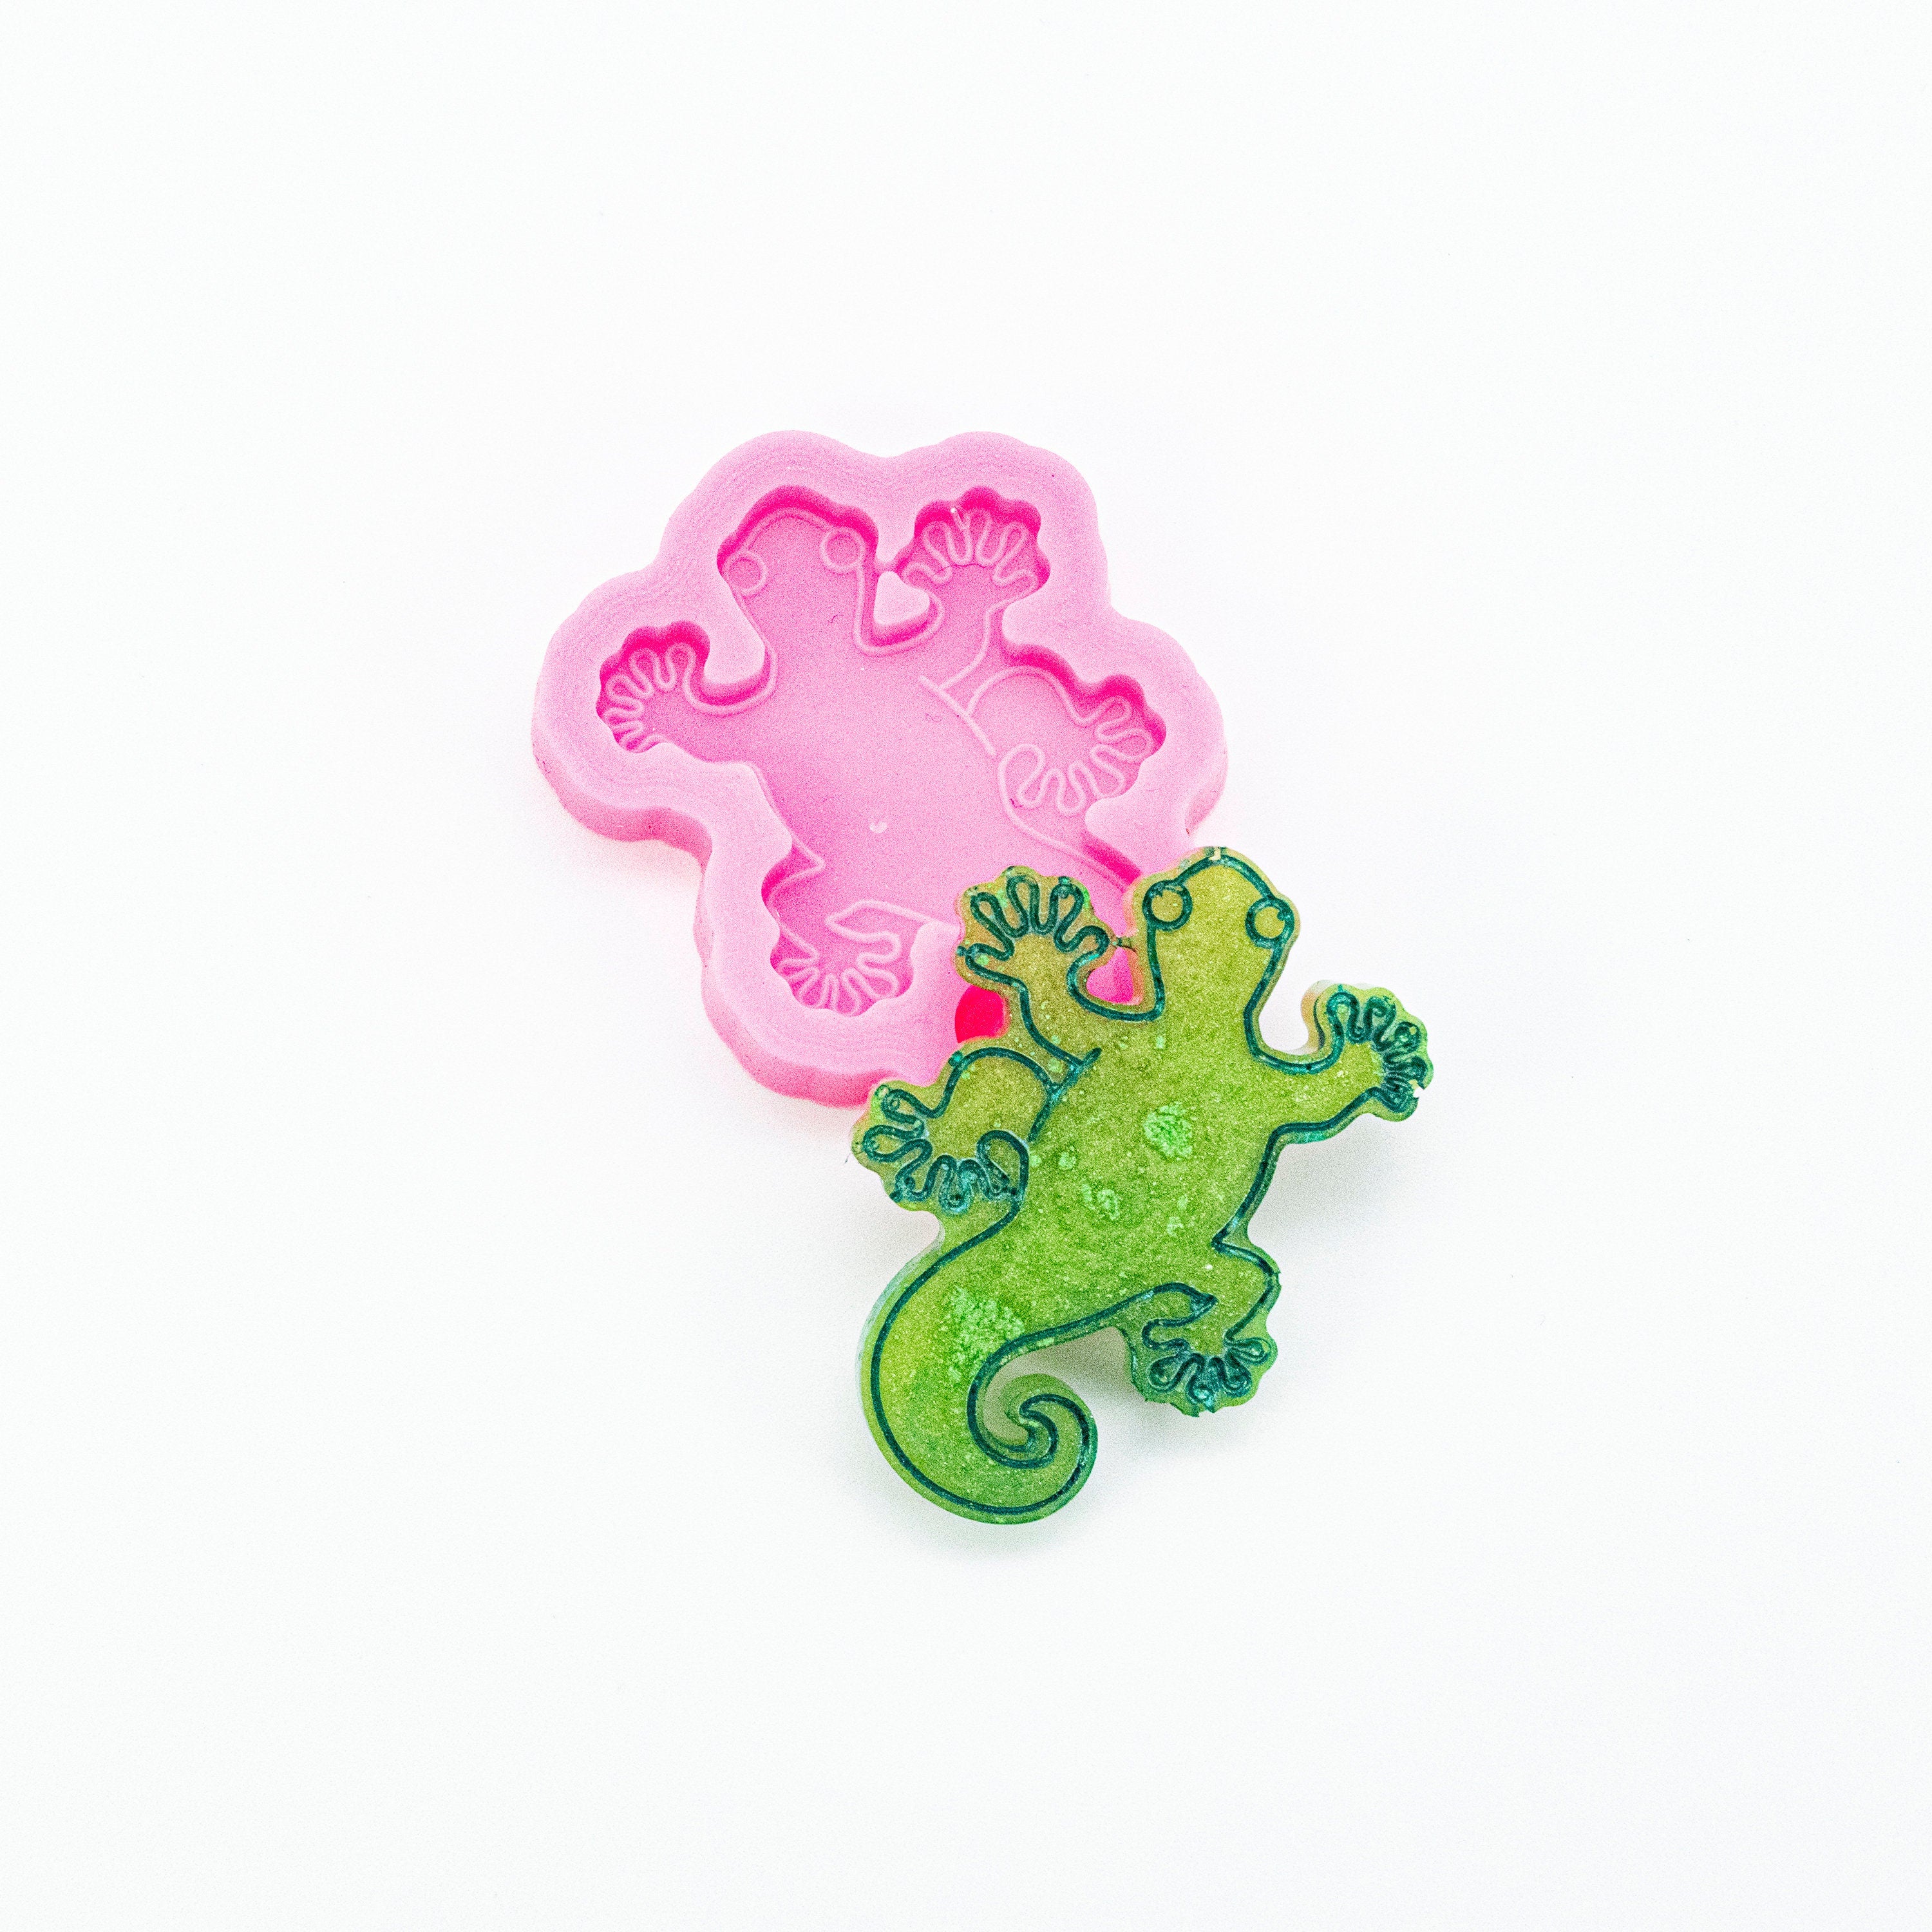 Lizard Shiny Silicone Mold for Epoxy Resin Keychain - Jewelry Making - Ornament Silicone Mold